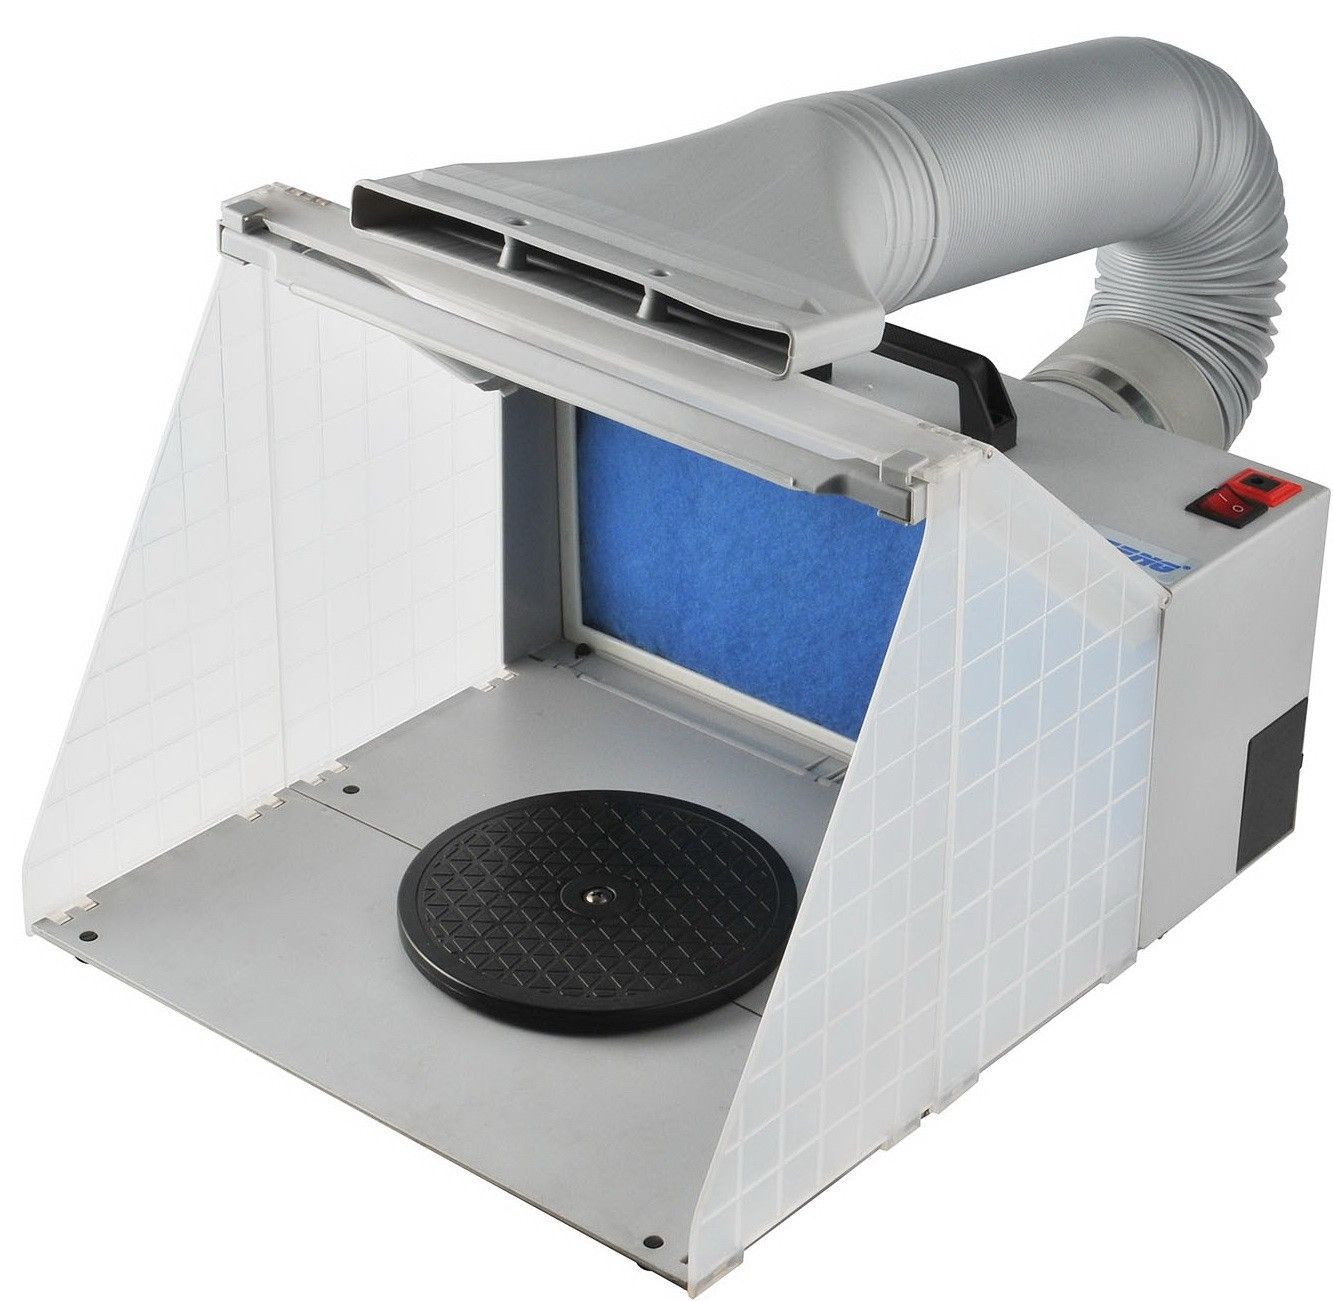 Airbrush extractor/spray booth with LED light and hose